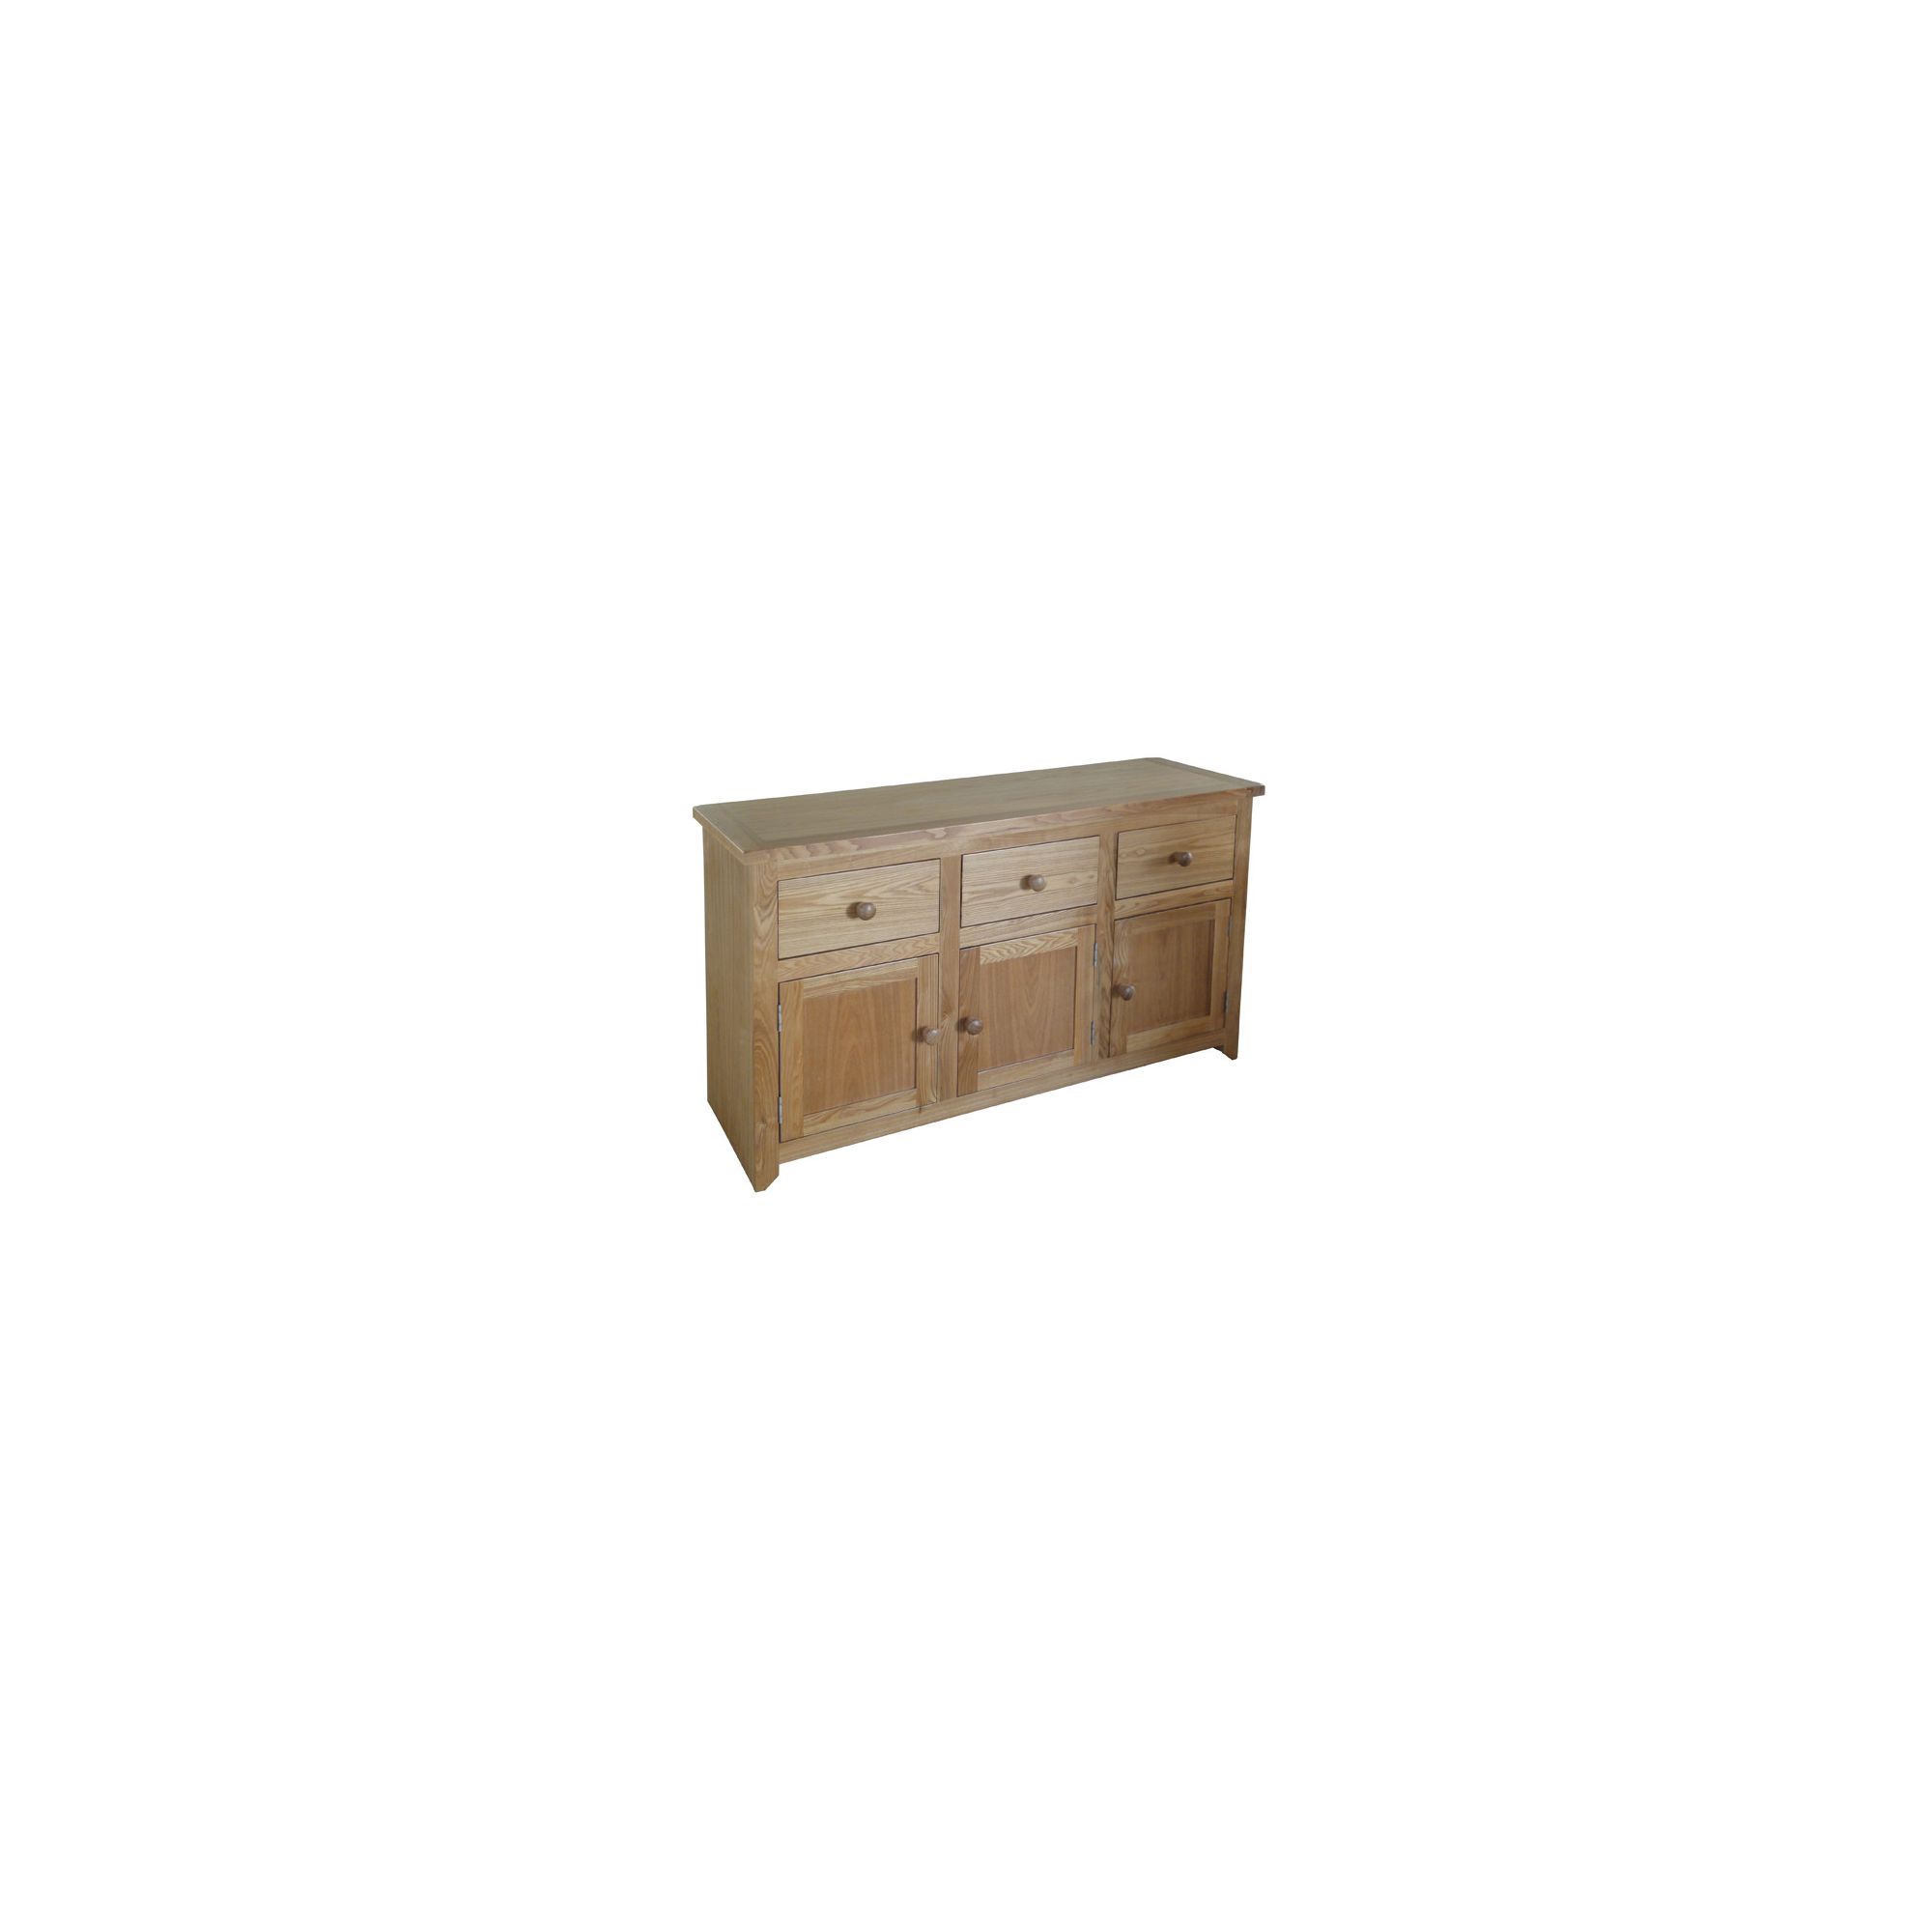 Home Essence Hamilton 3 Door Sideboard in Natural Ash at Tesco Direct